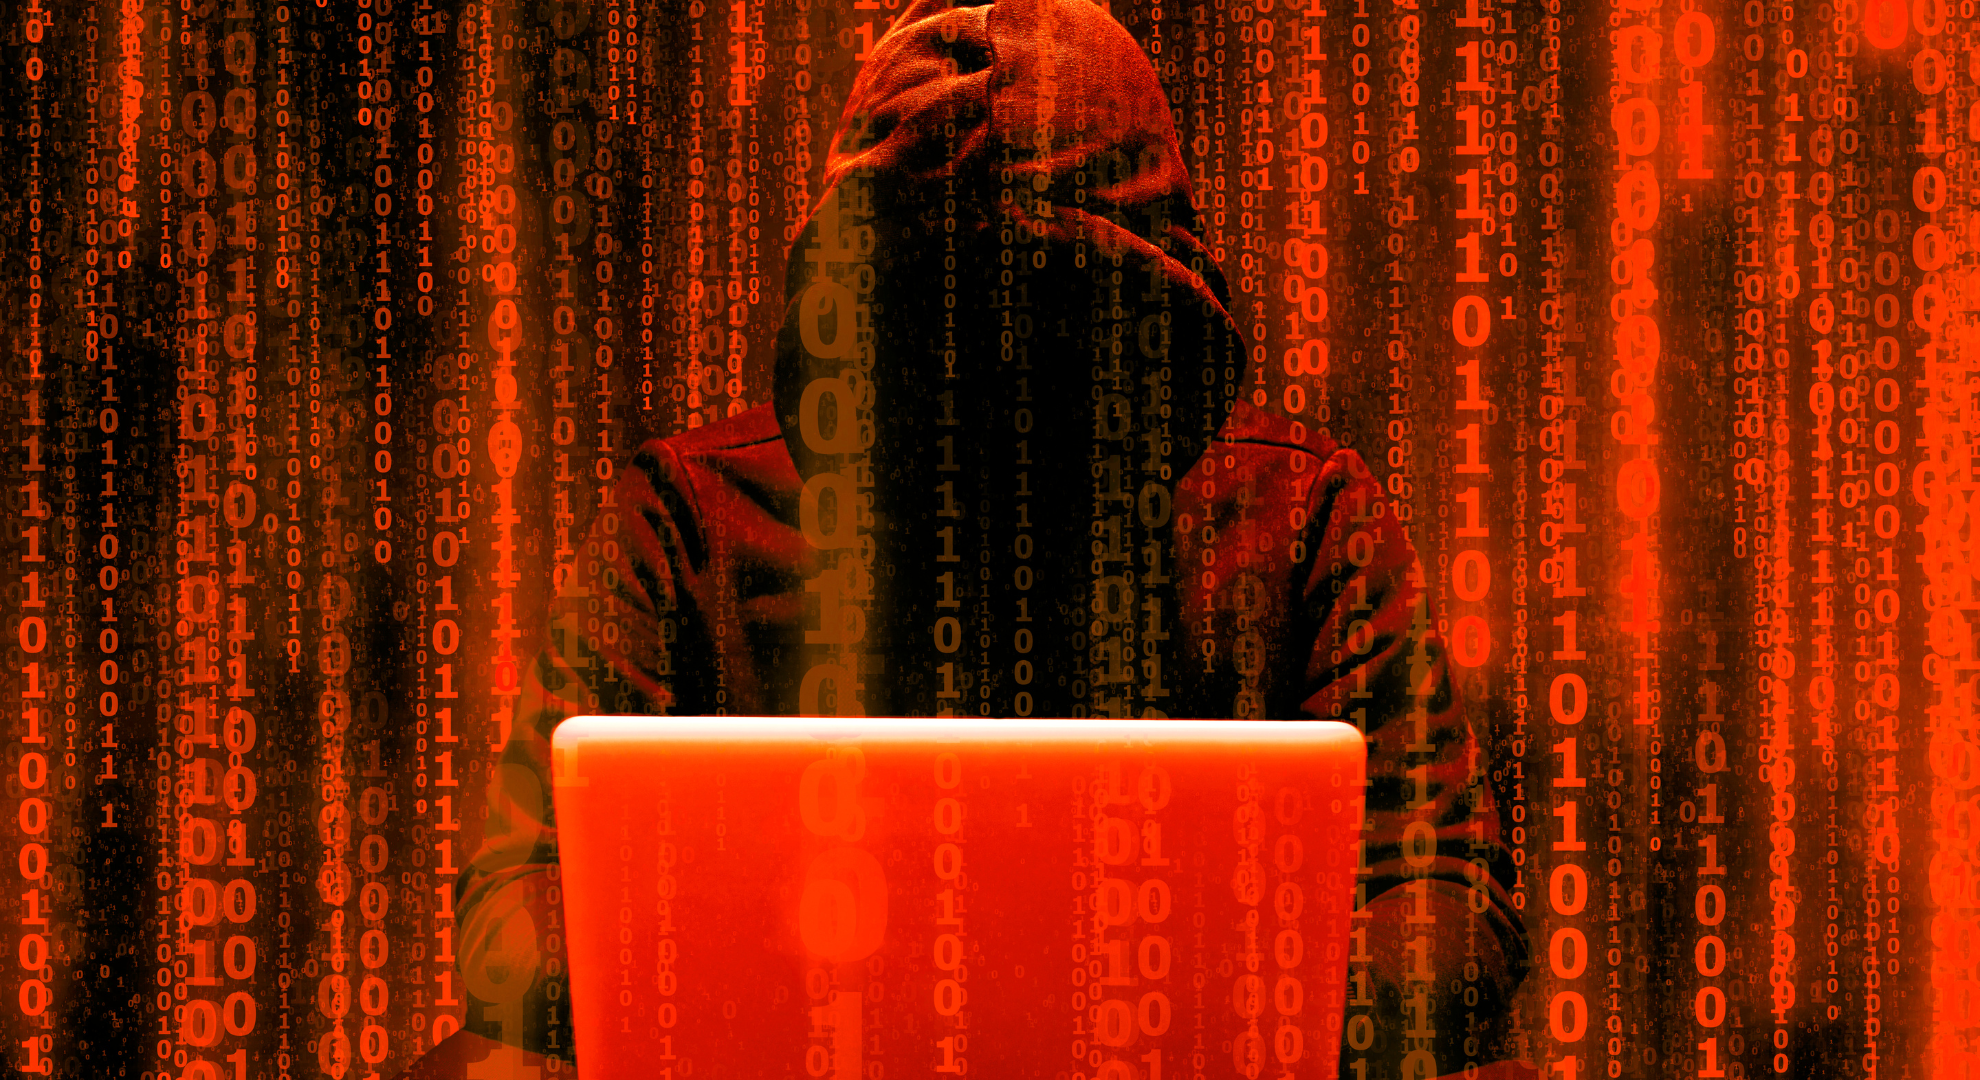 Chinese government-linked hackers